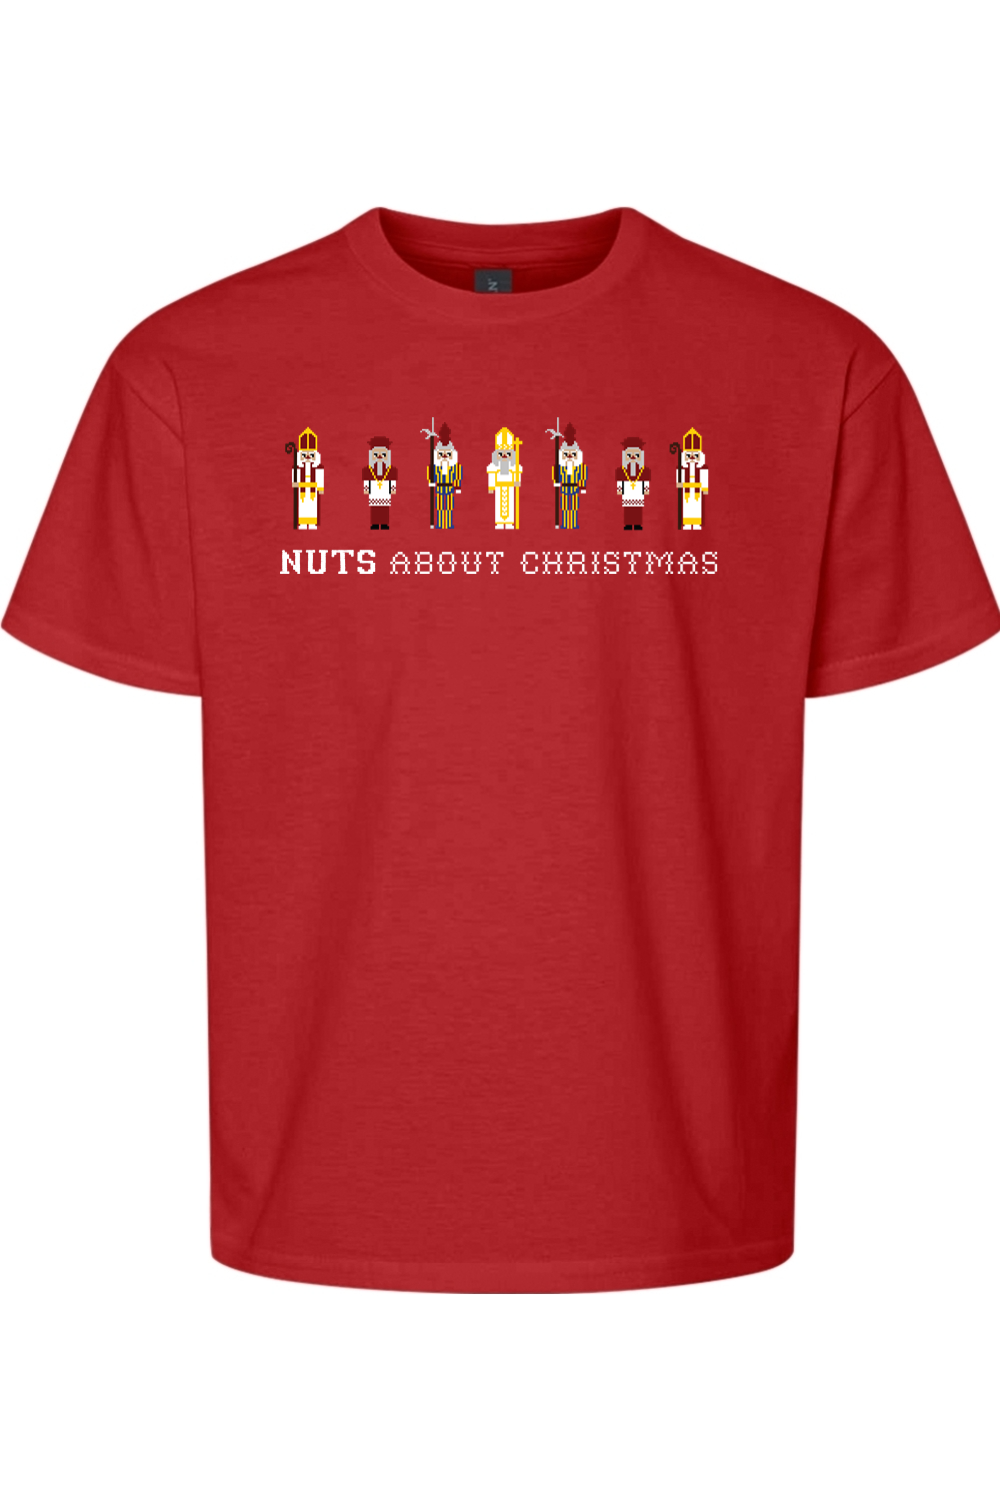 Nuts About Christmas T -Shirt - youth